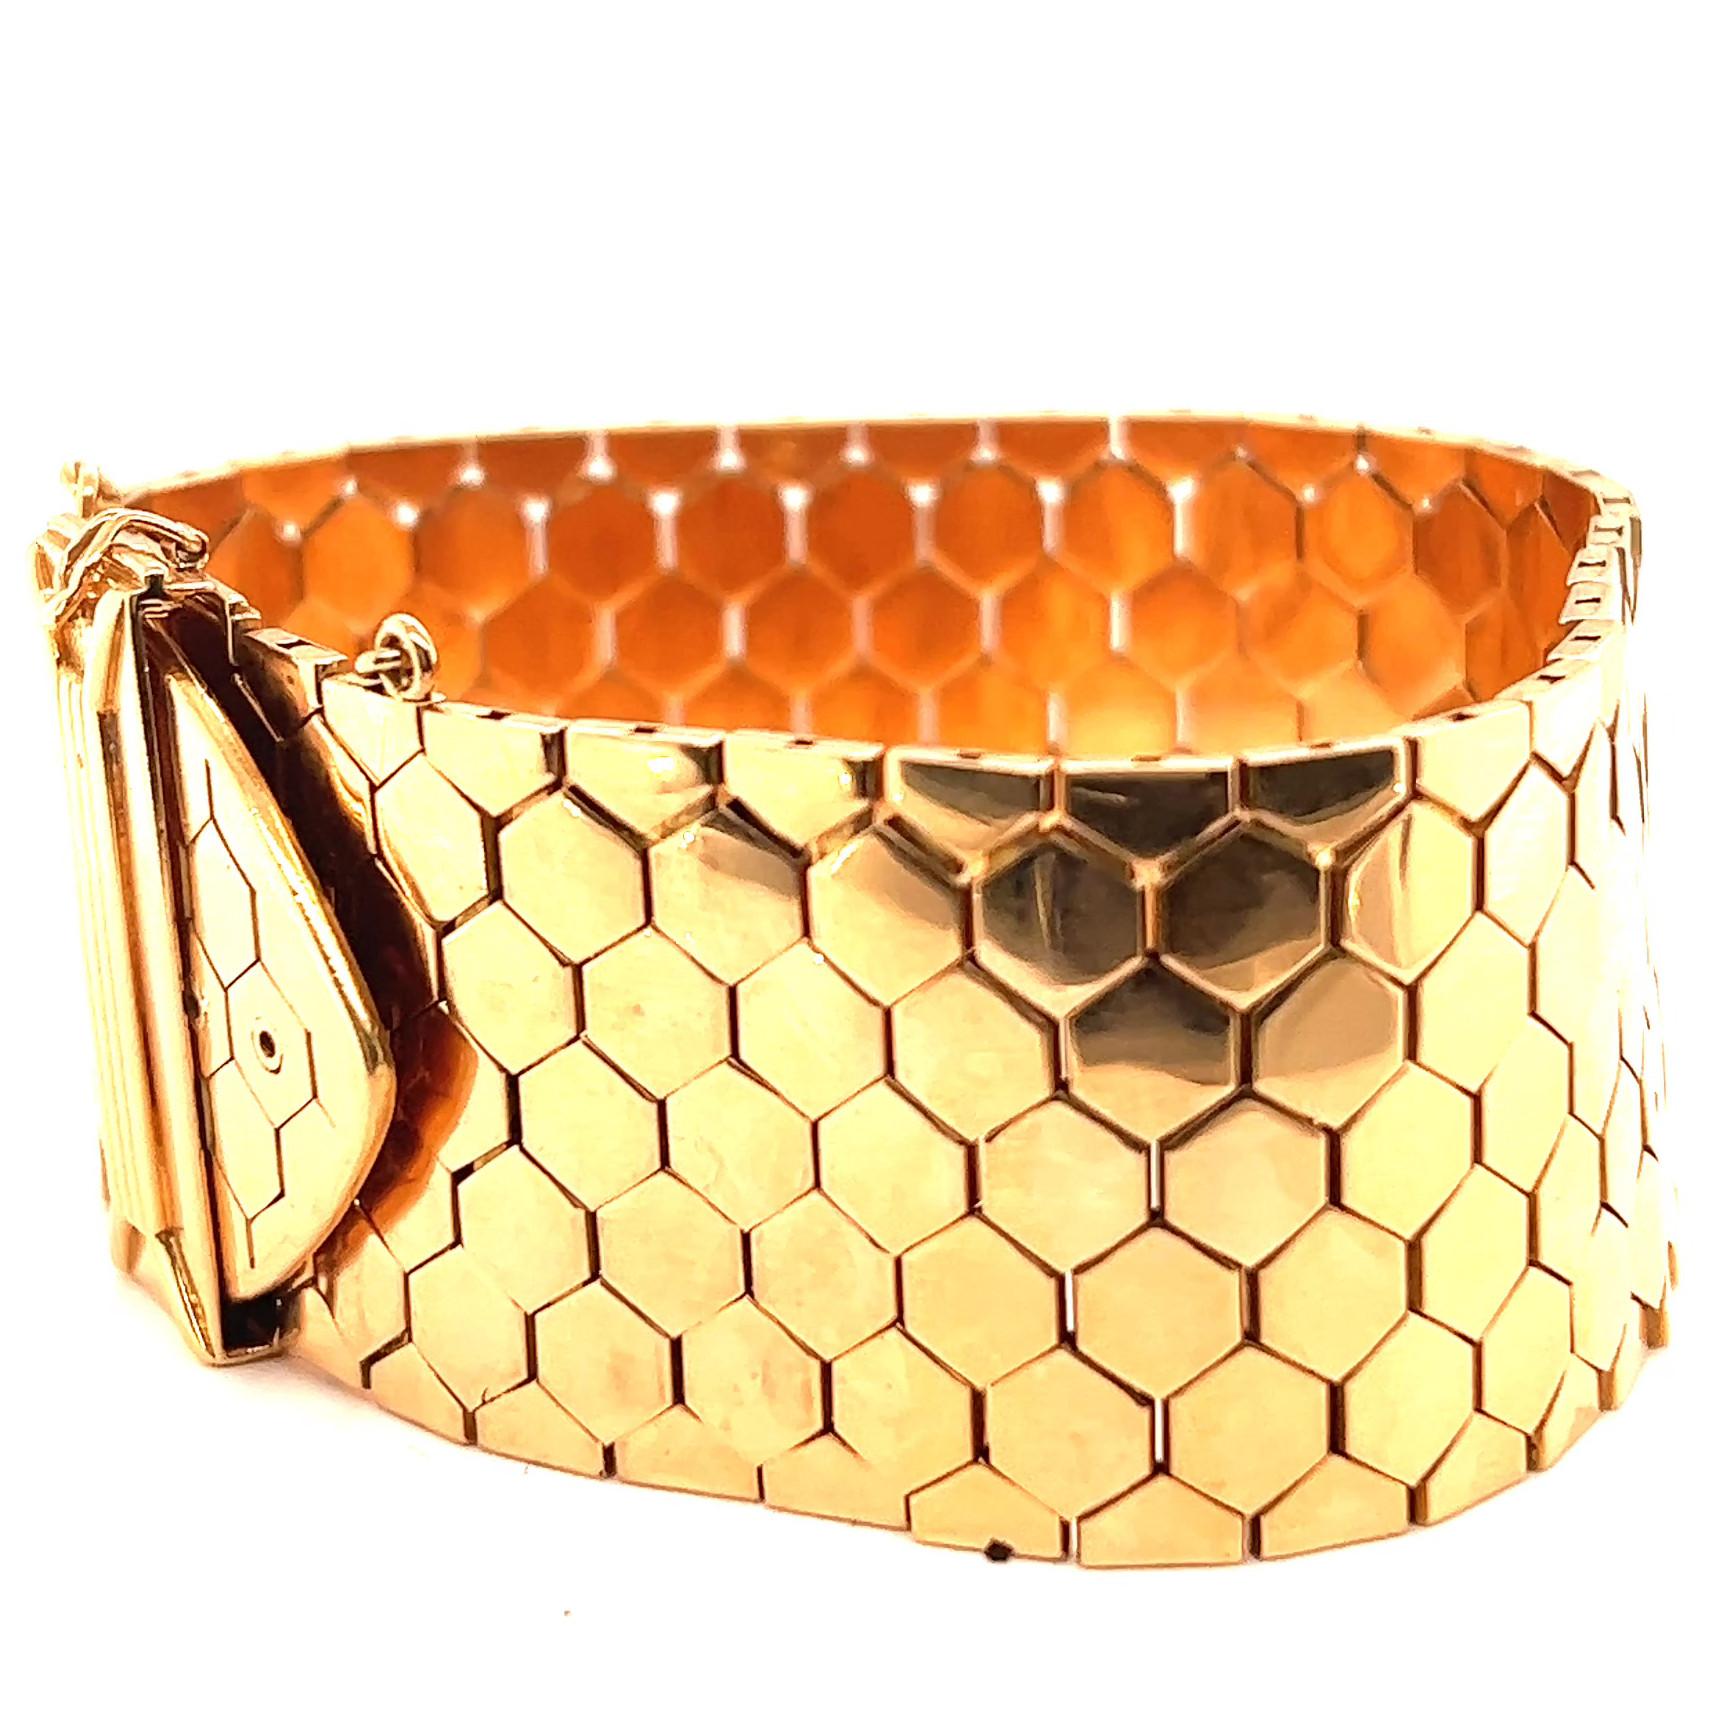 One Retro French 18 Karat Rose Gold Honeycomb Tank Bracelet. Crafted in 18 karat yellow gold with French hallmarks. Circa 1940s. The bracelet is adjustable from 6 inches to 8 inches in length.

About this Item: Spice up your jewelry collection and